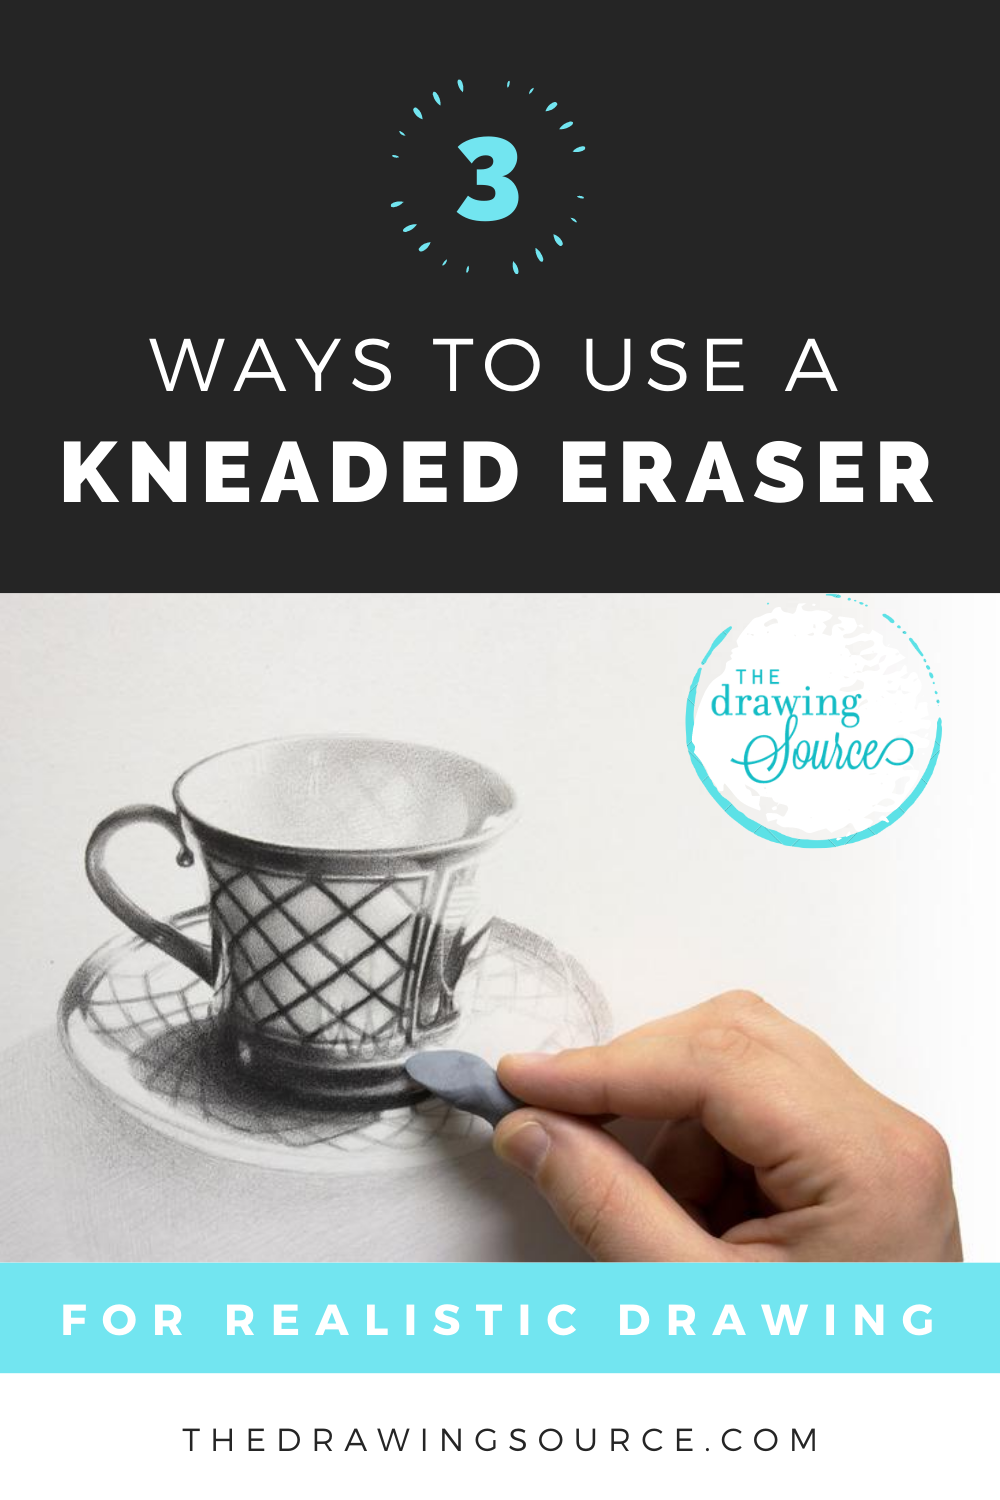 What is a kneaded eraser – How do you use one?